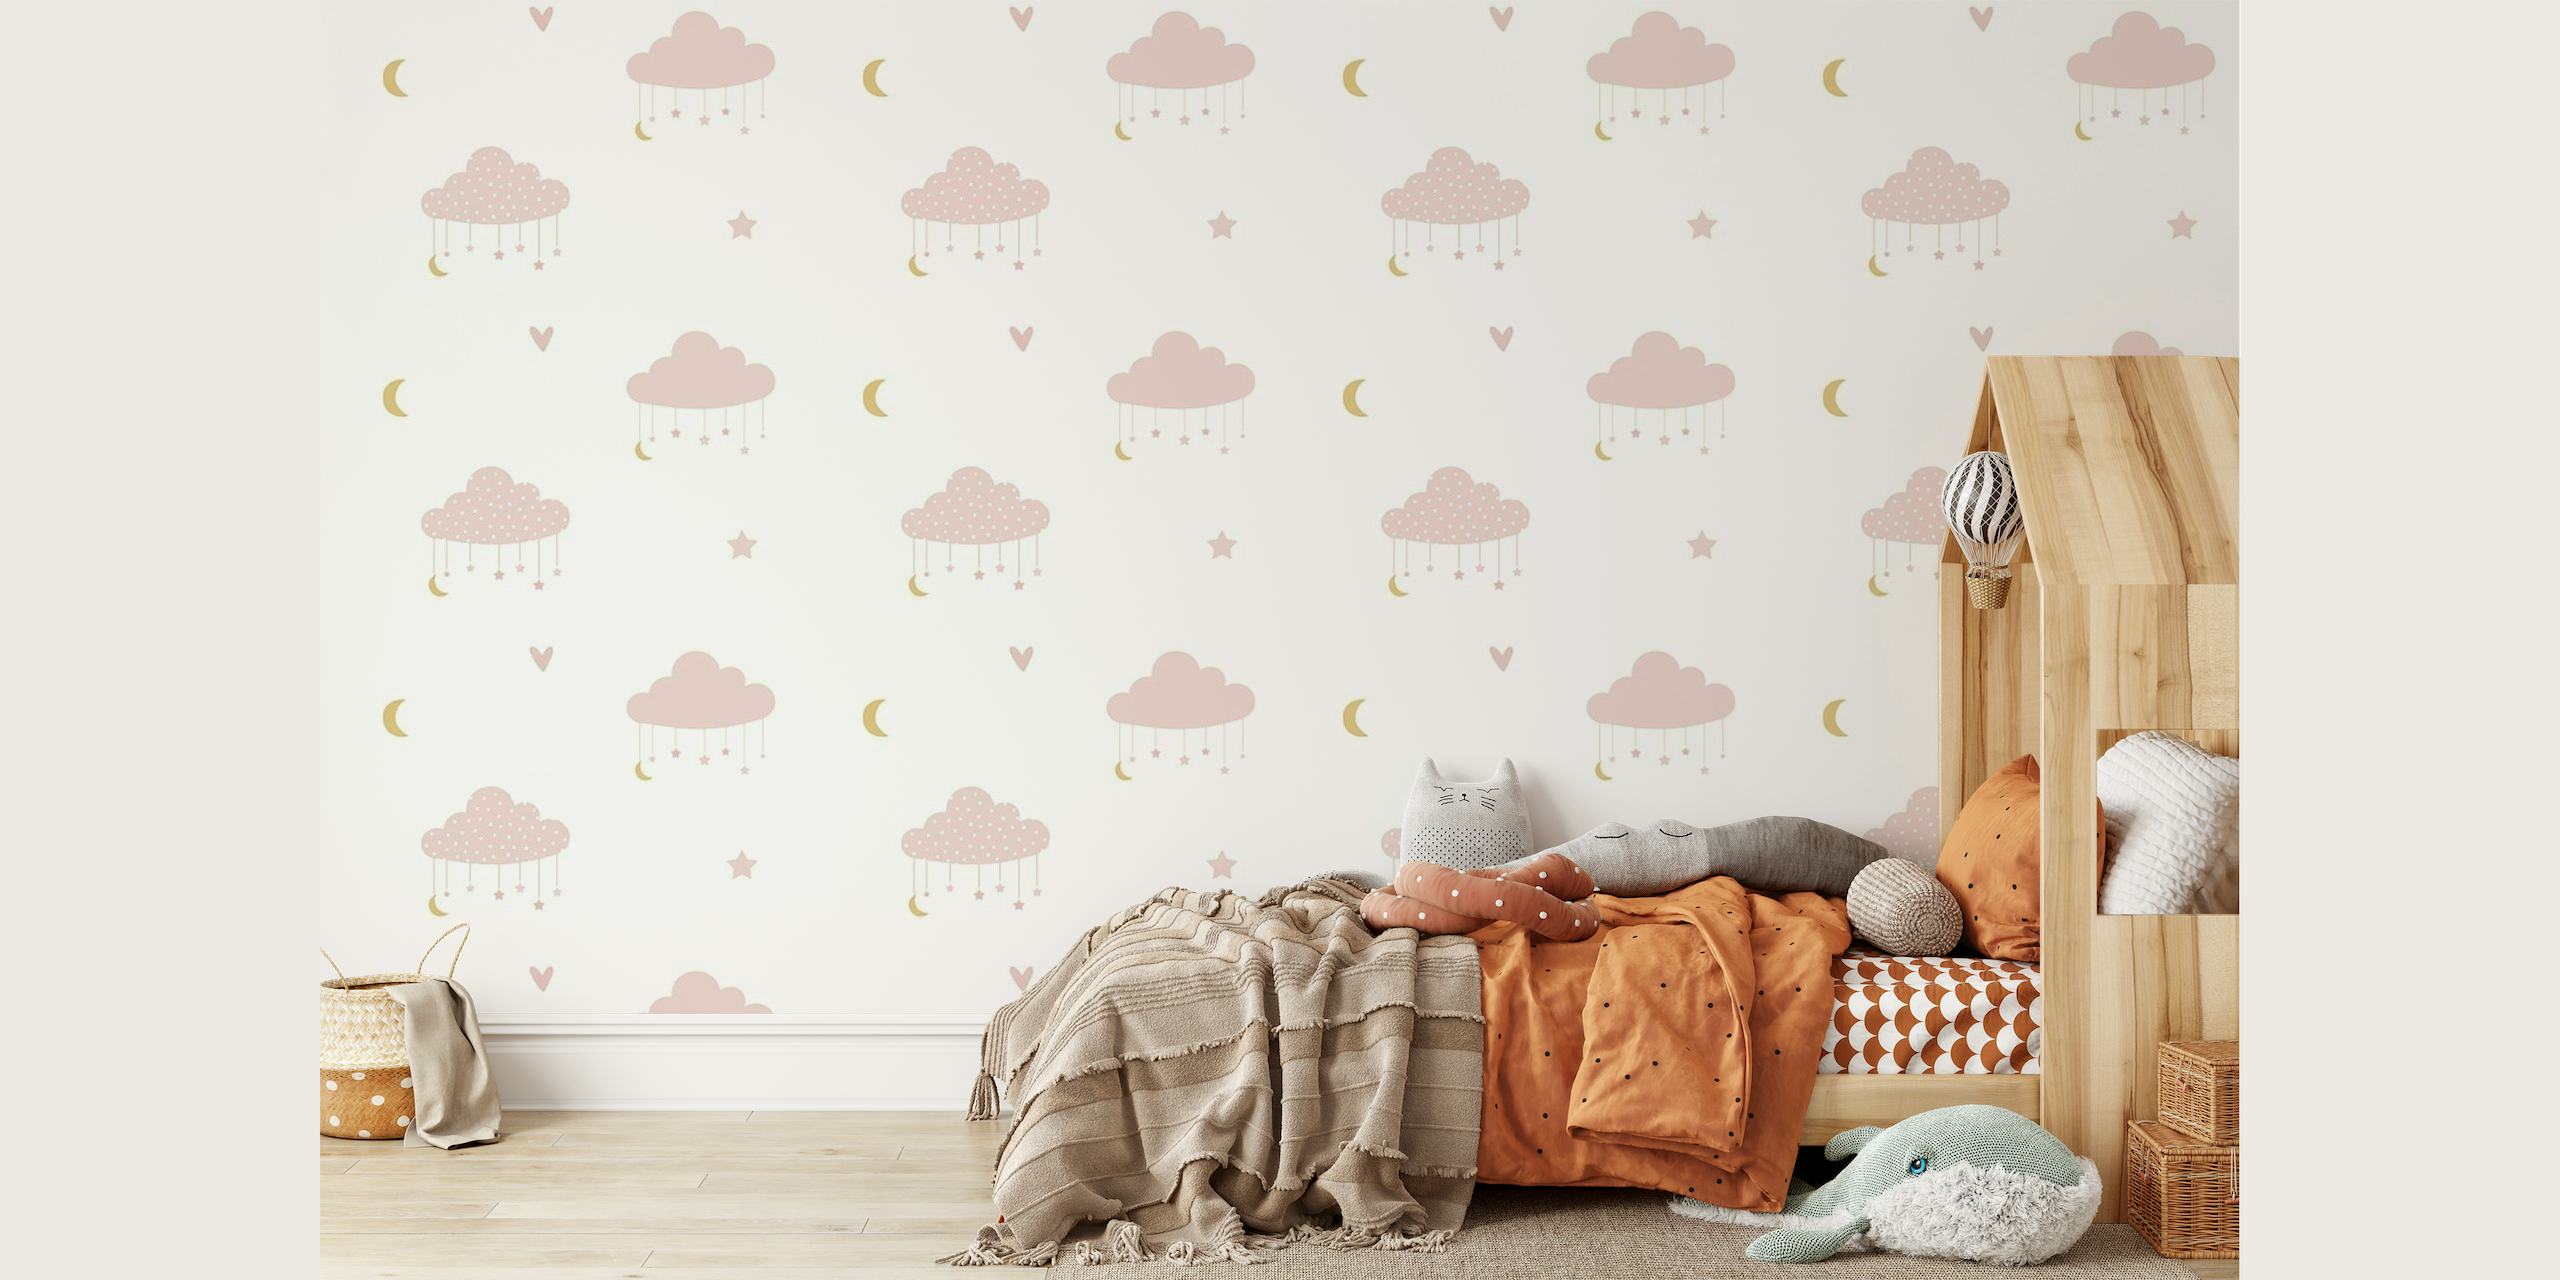 Whimsical pink clouds pattern on a cream background wall mural